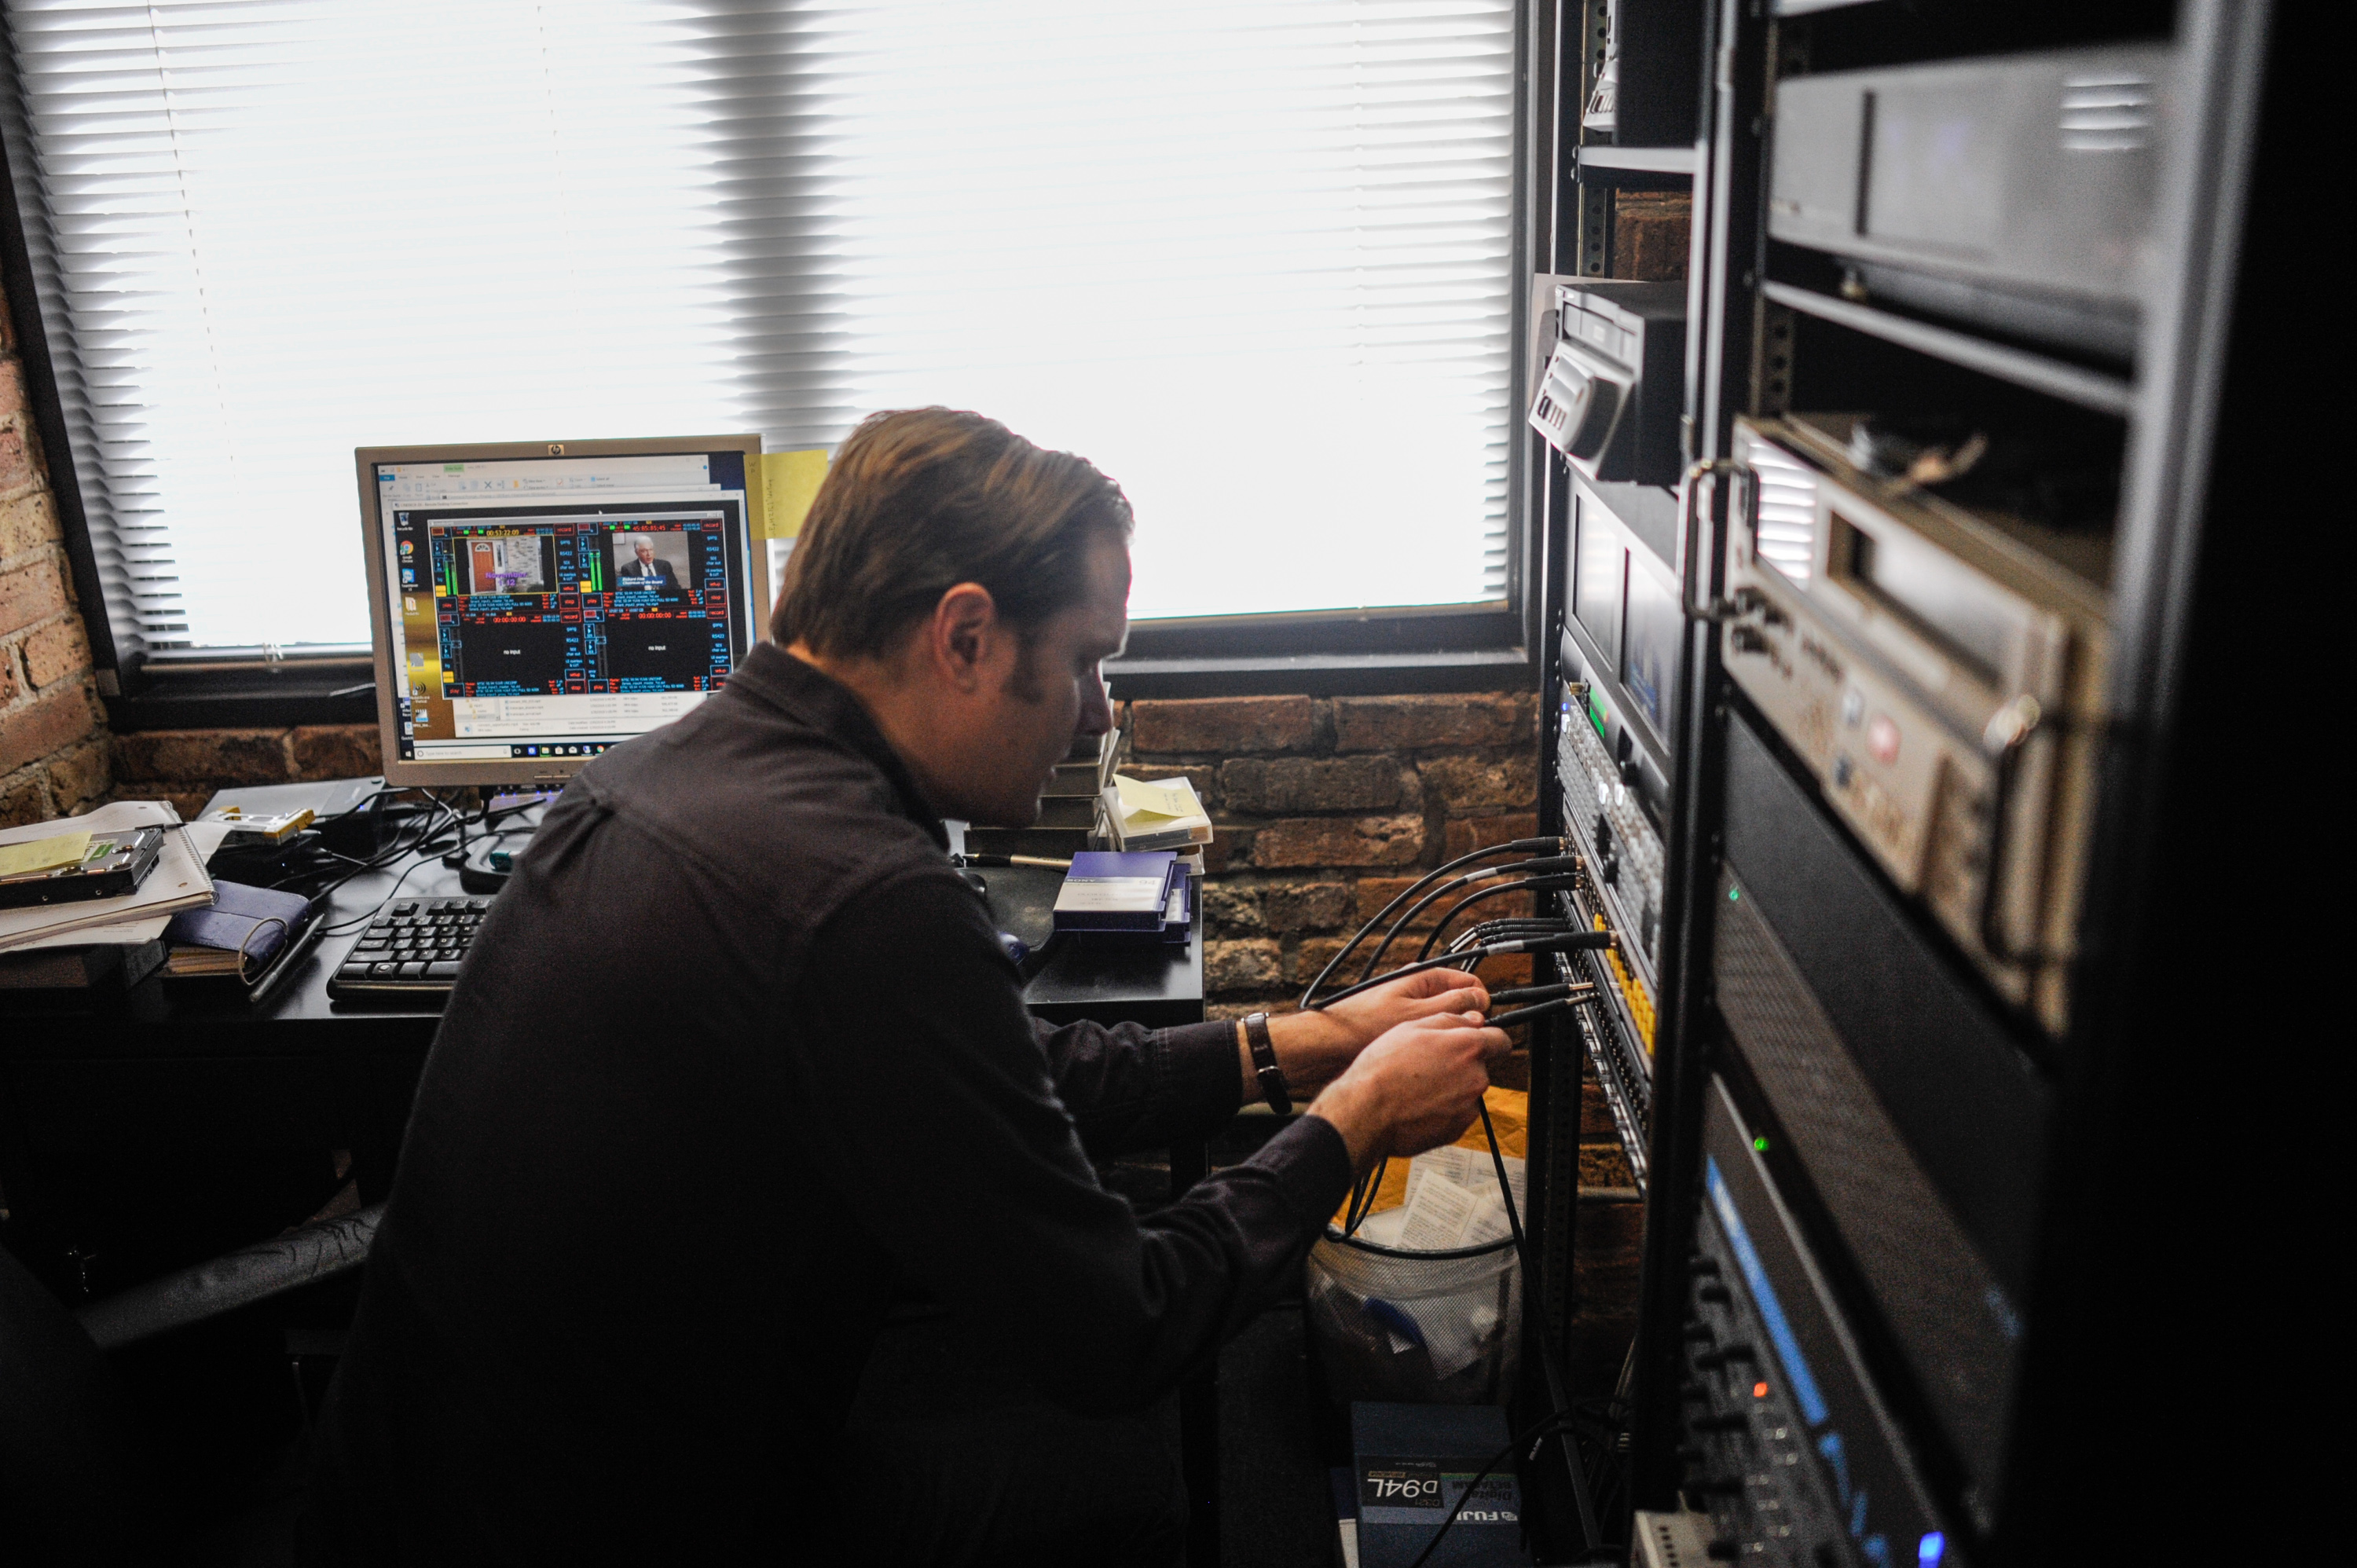 Archivist Dan Erdma plugs a wire into equipment at Media Burn. He is surrounded by various equipment used for digitizing and playing different video formats. Photo by William Camargo.